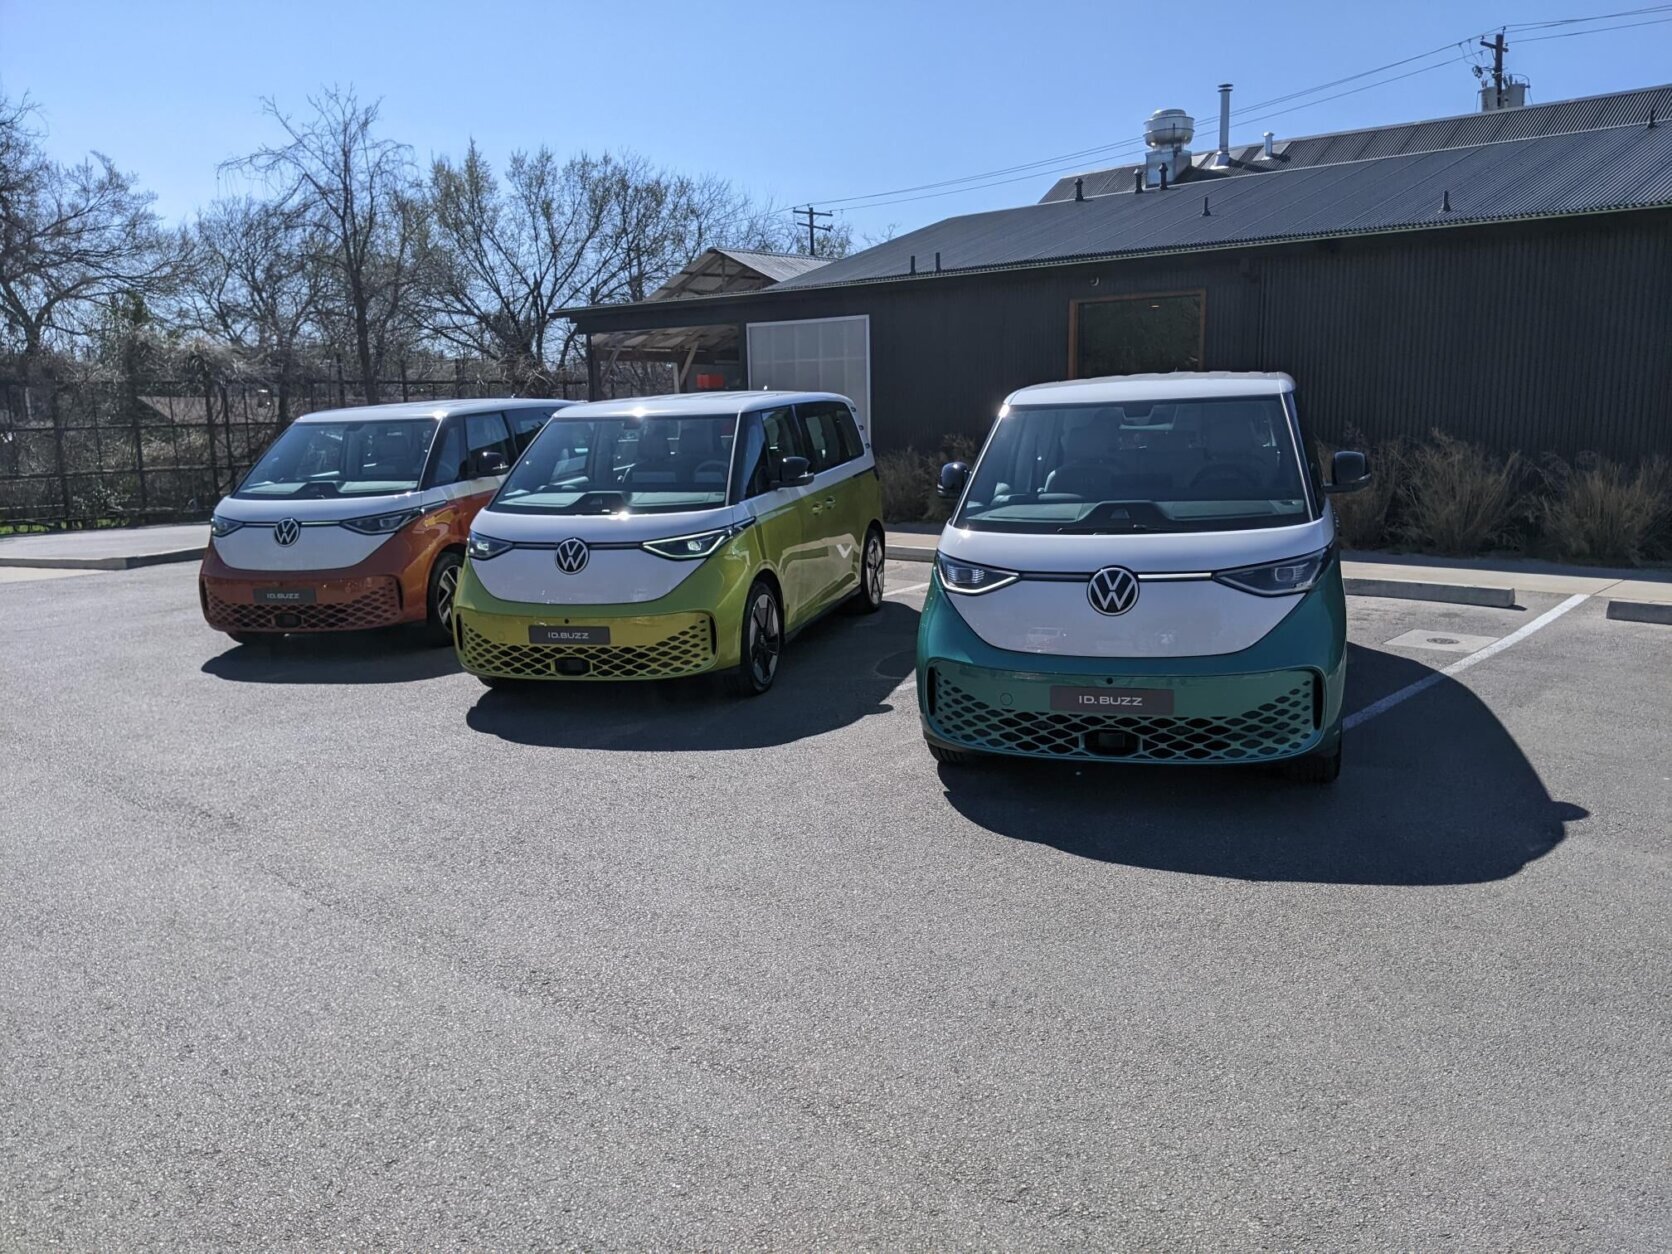 As part of the company’s new three-year sponsorship of SXSW, Herndon-based Volkswagen is hosting various "Buzz Stops" throughout Austin, where festival attendees can experience the next upcoming chapter of the iconic vehicle brand's future.